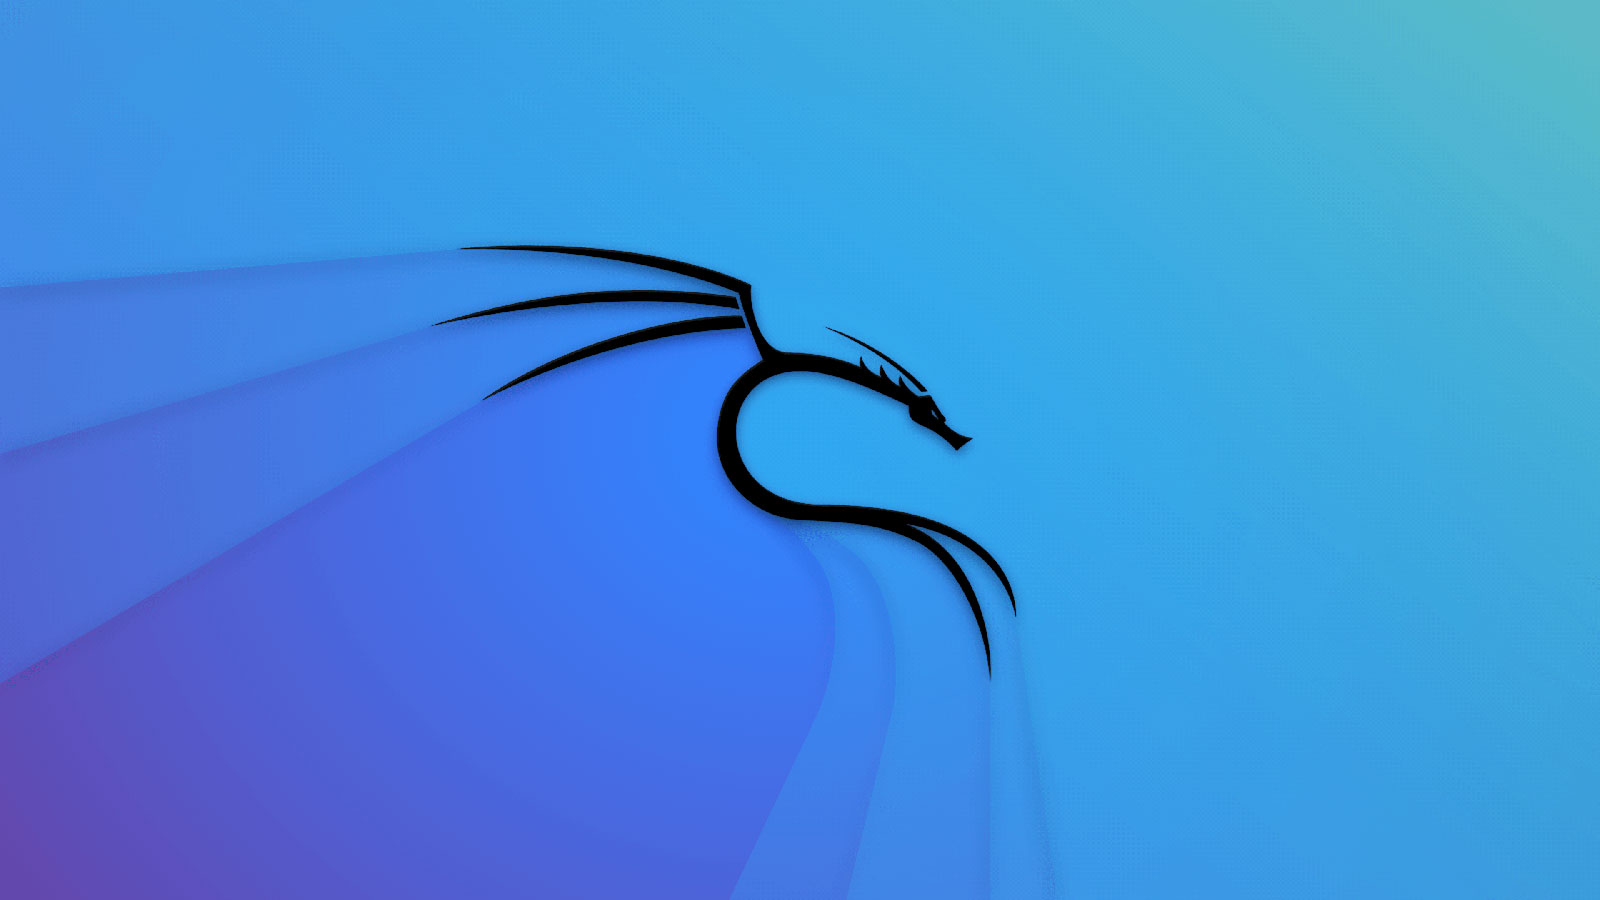 Kali Linux 2022.2 released with 10 new tools, WSL improvements, and more